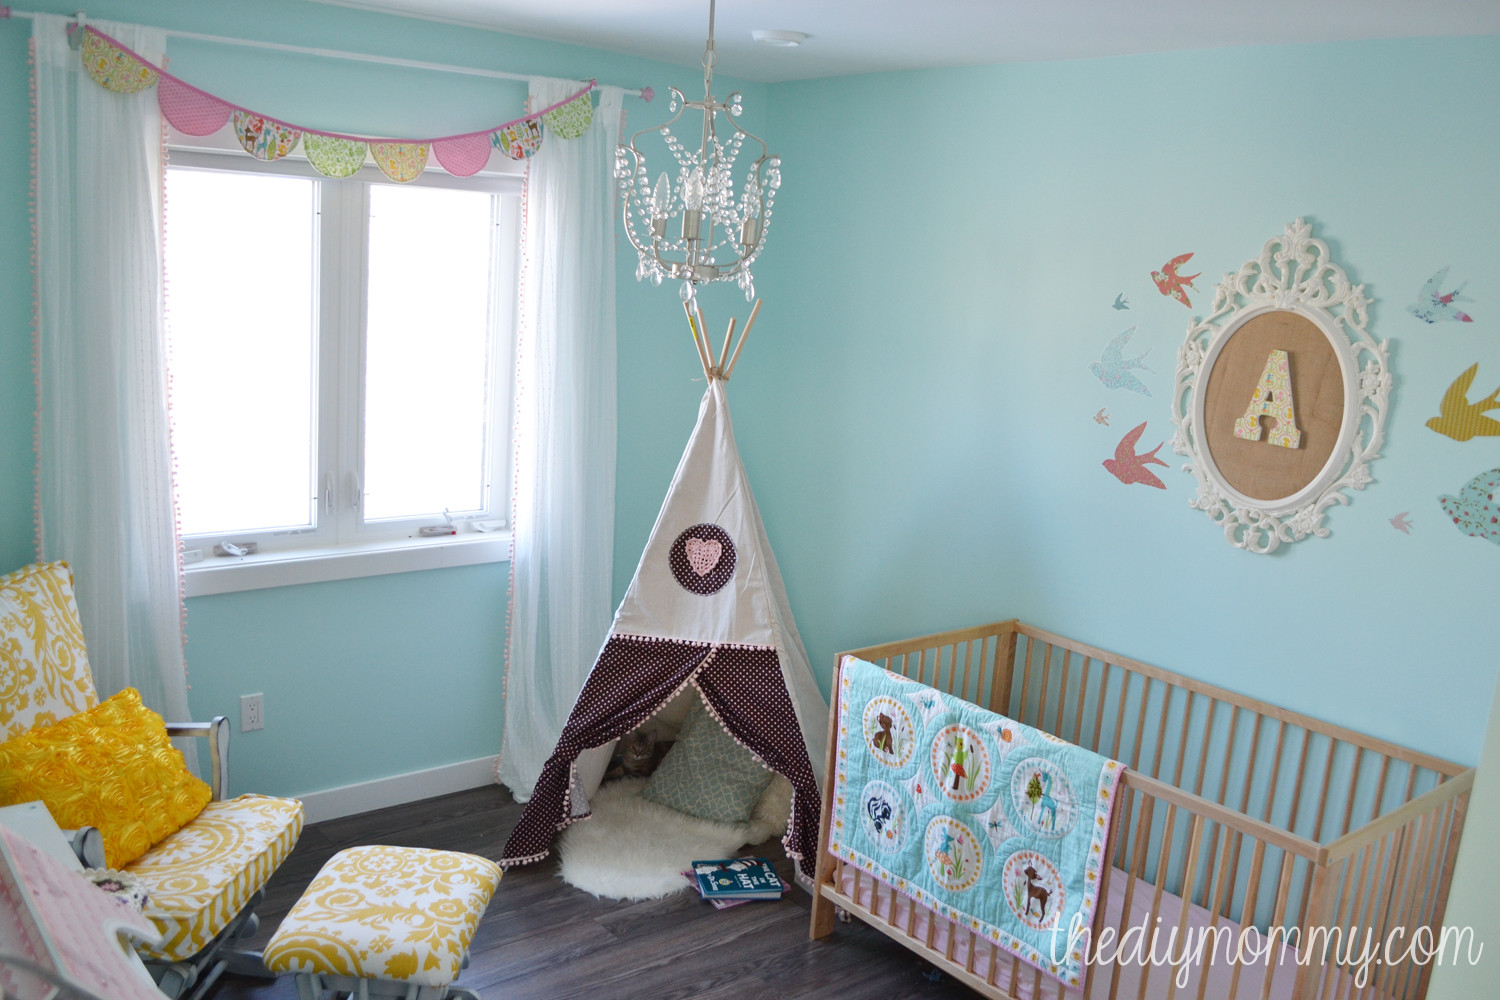 DIY Toddler Room Decor
 Our DIY House The Progress Taking It e Room at a Time